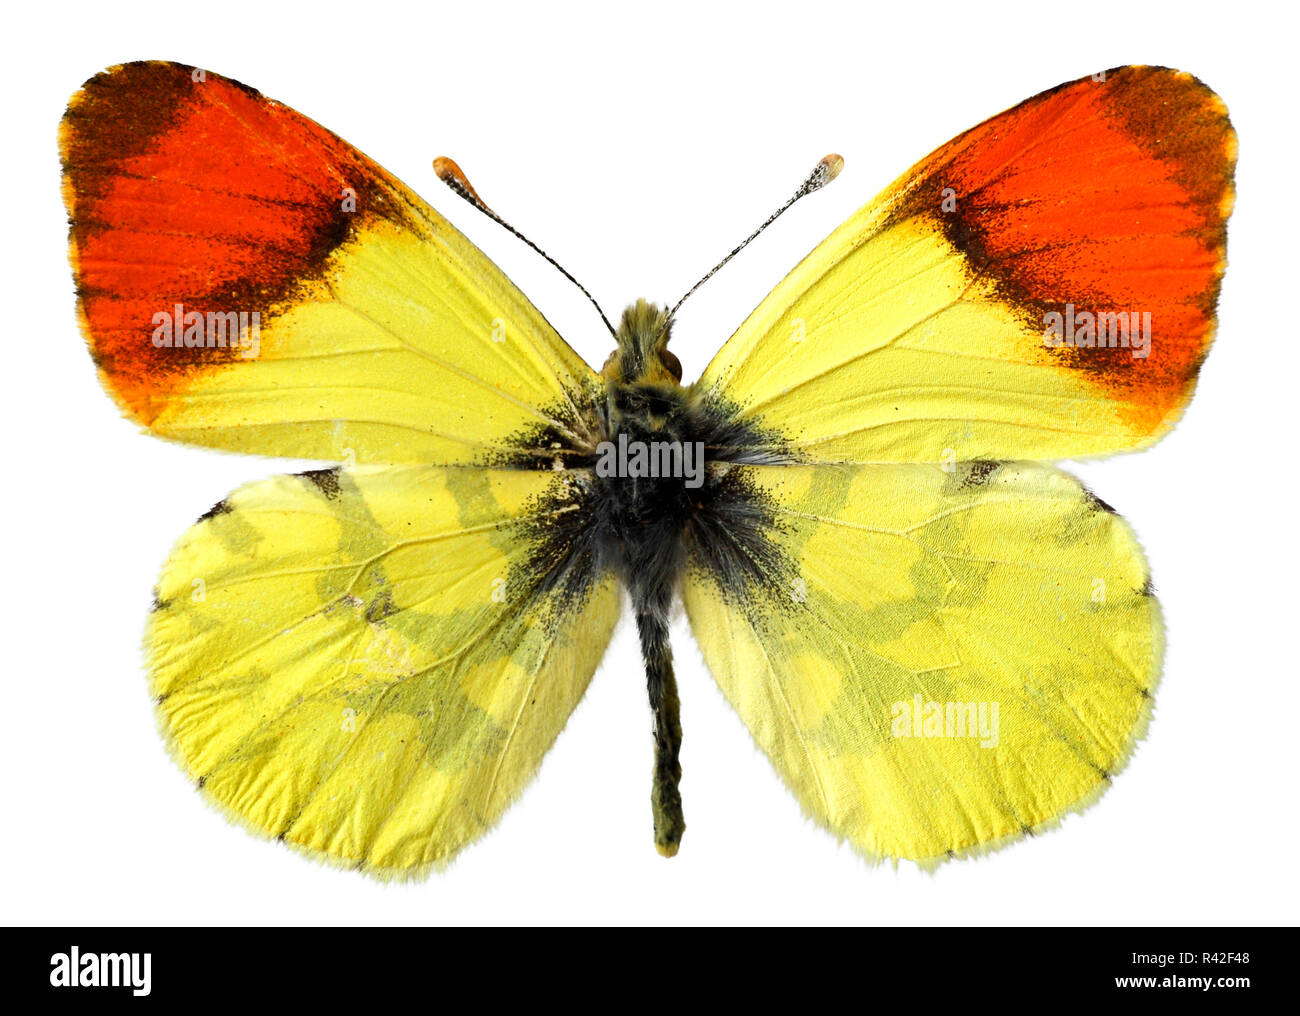 Isolated Morocco orange butterfly Stock Photo